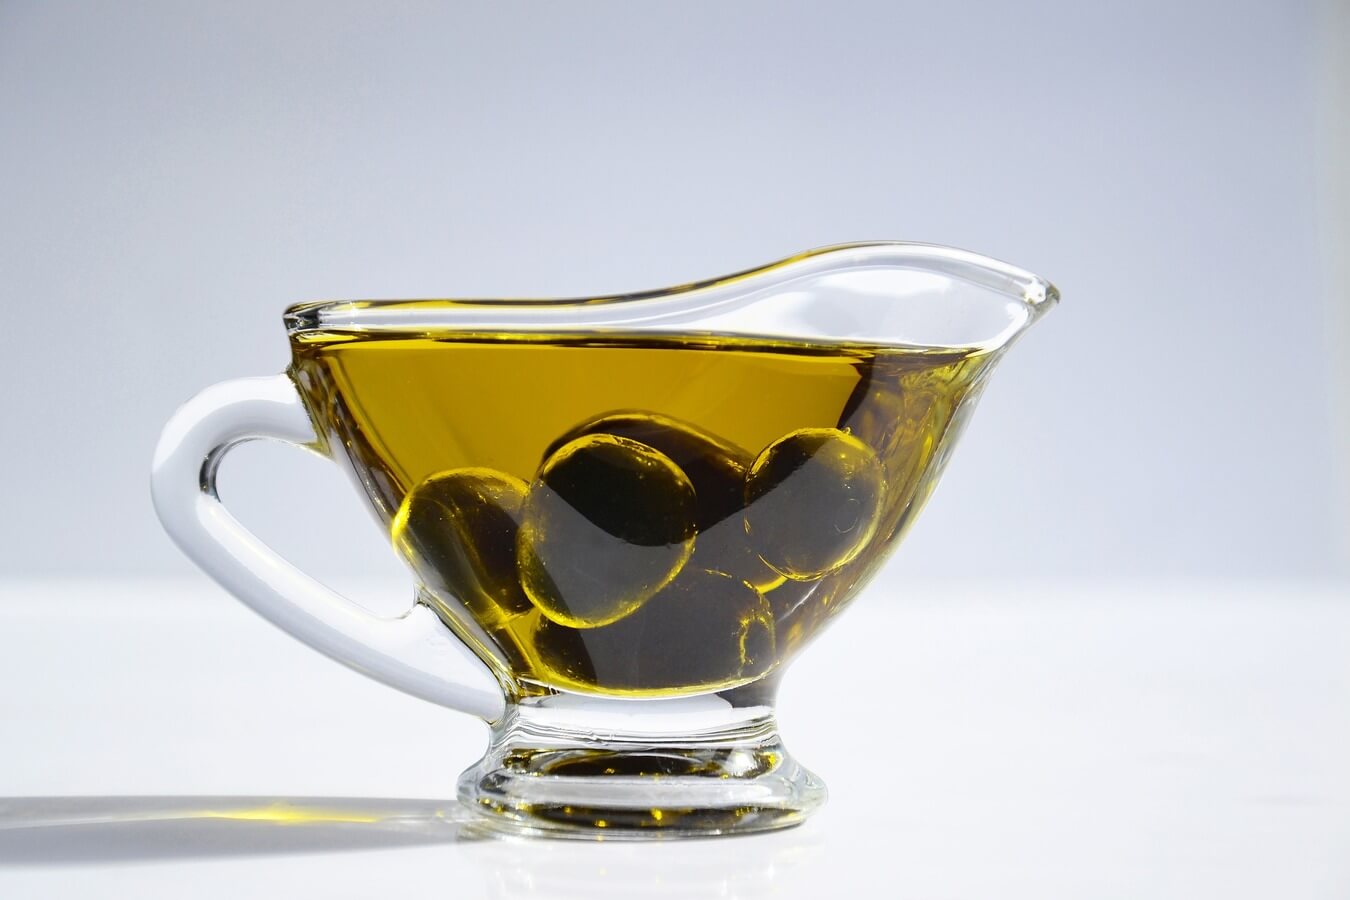 Learn how to store olive oil properly